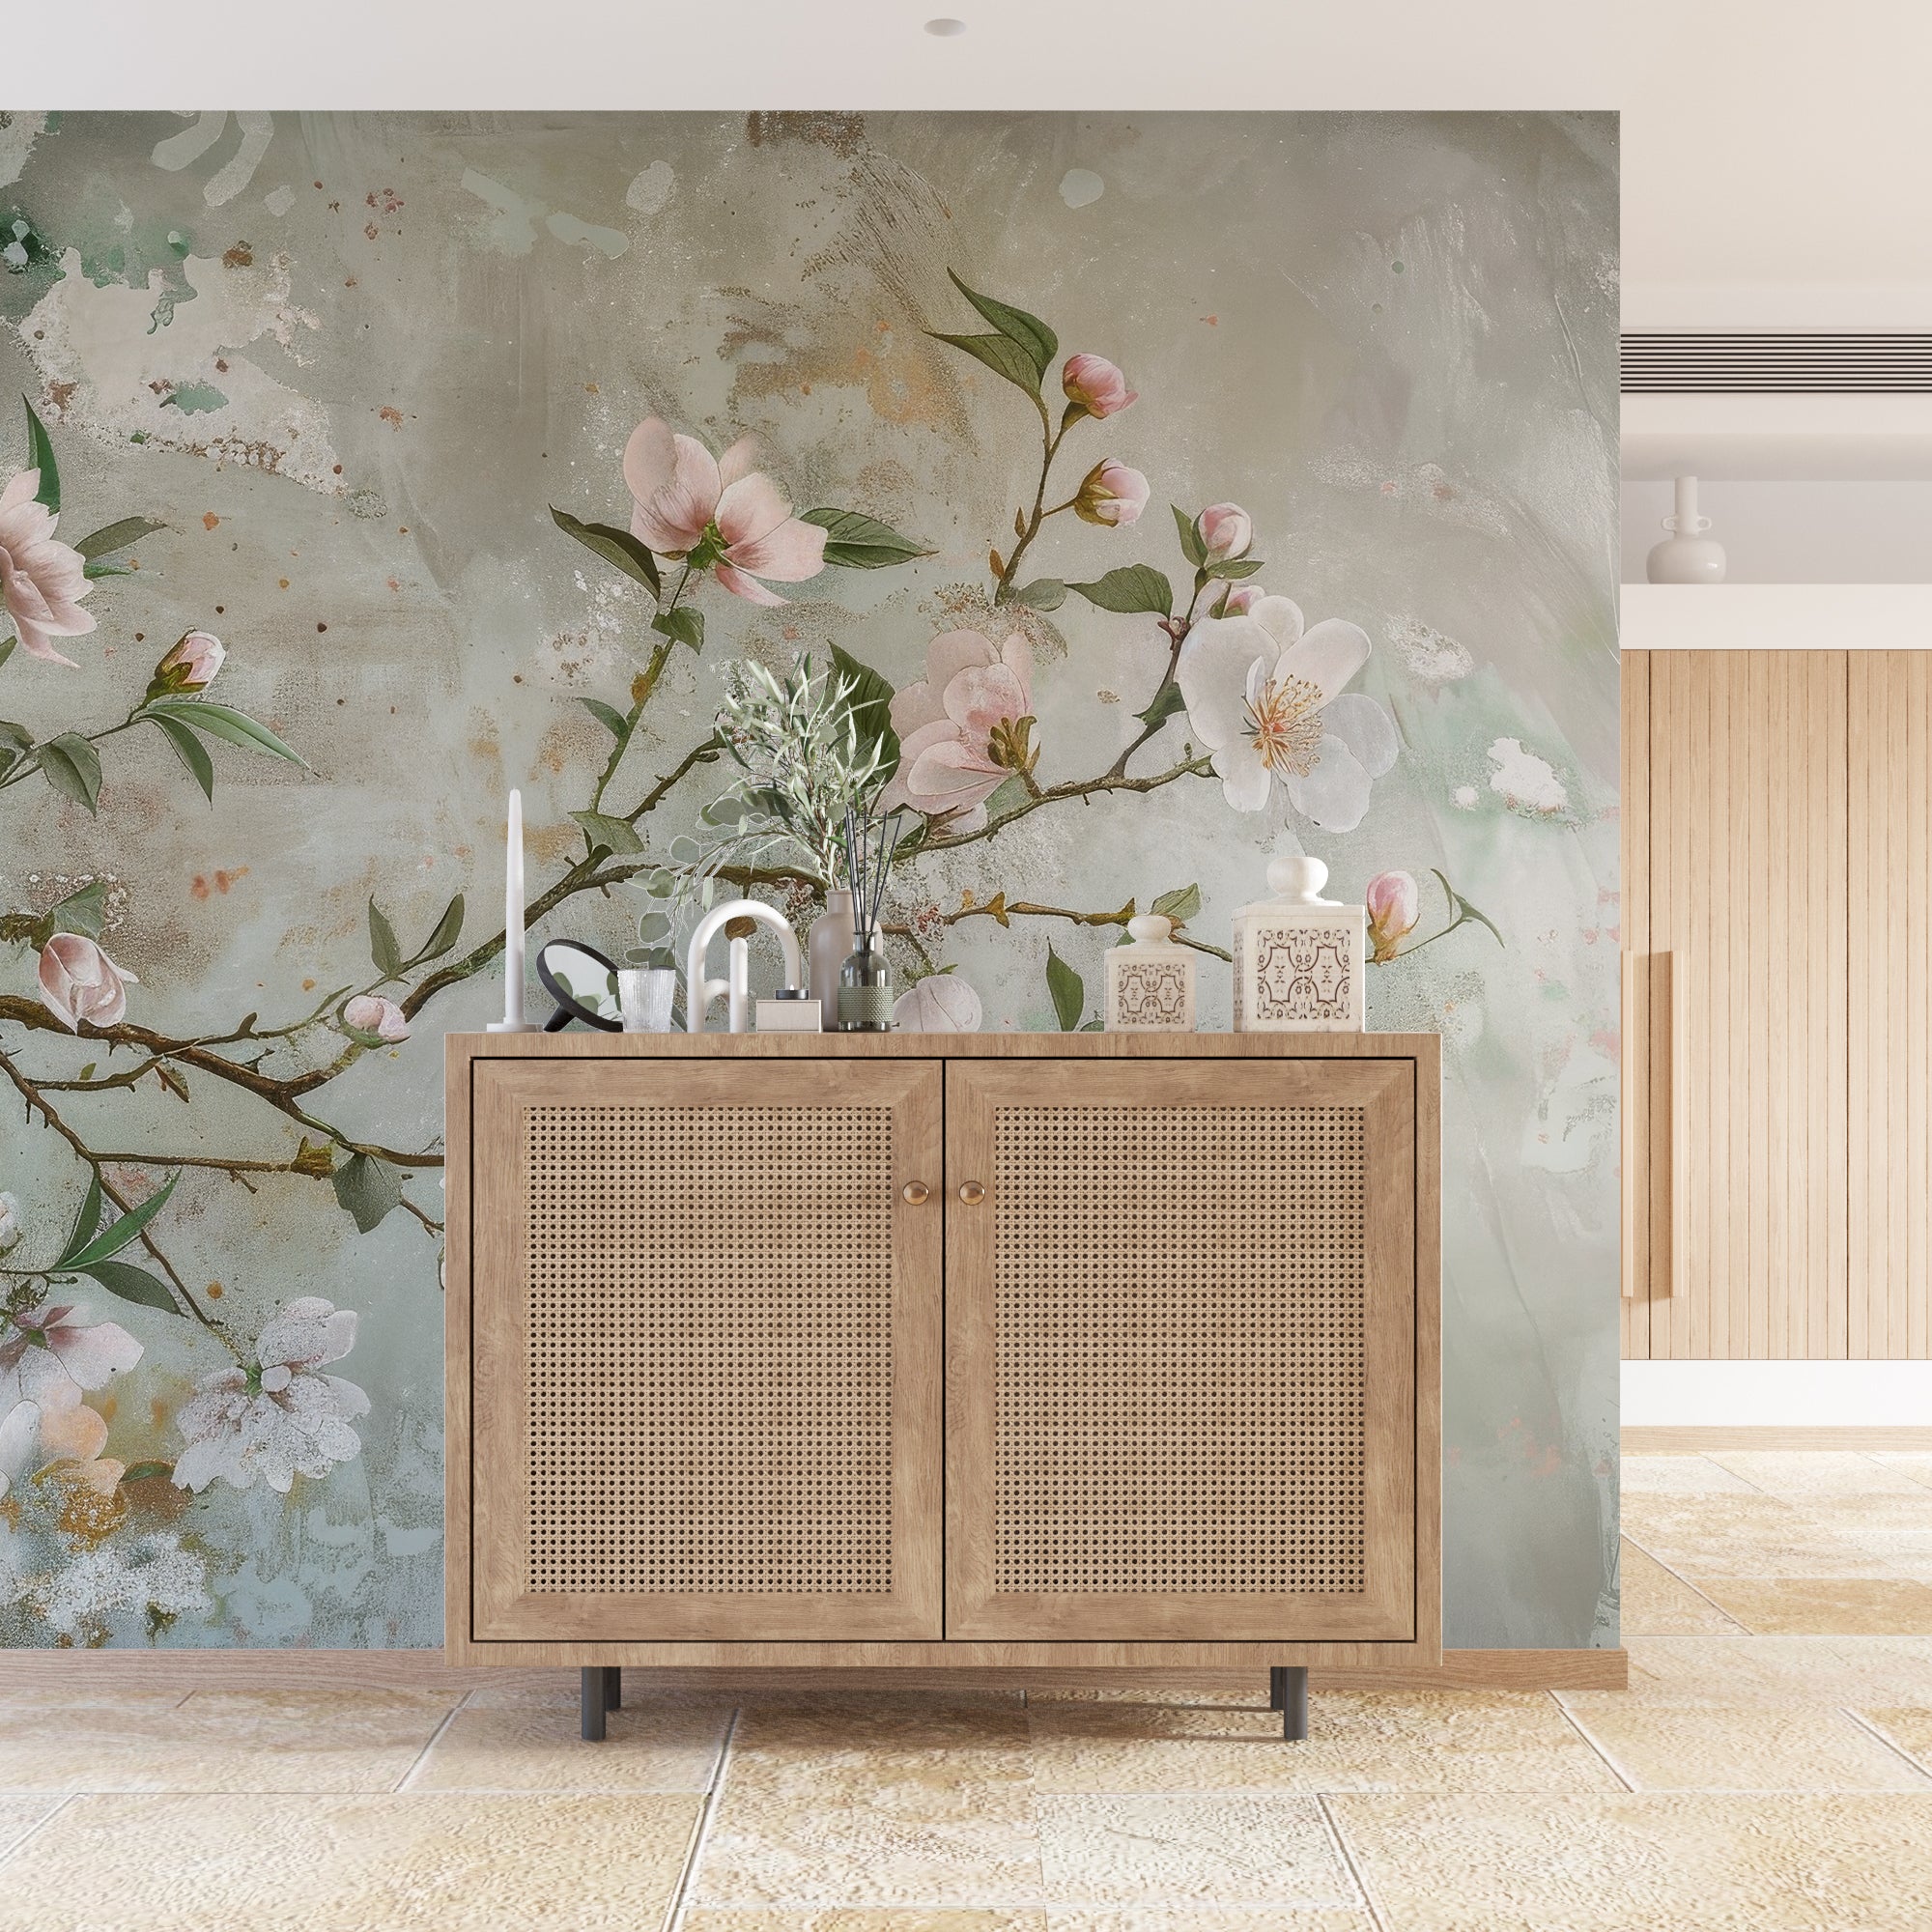 Dream of Chinoiserie: Floral Burst in wallpaper for an Elegant Ambiance